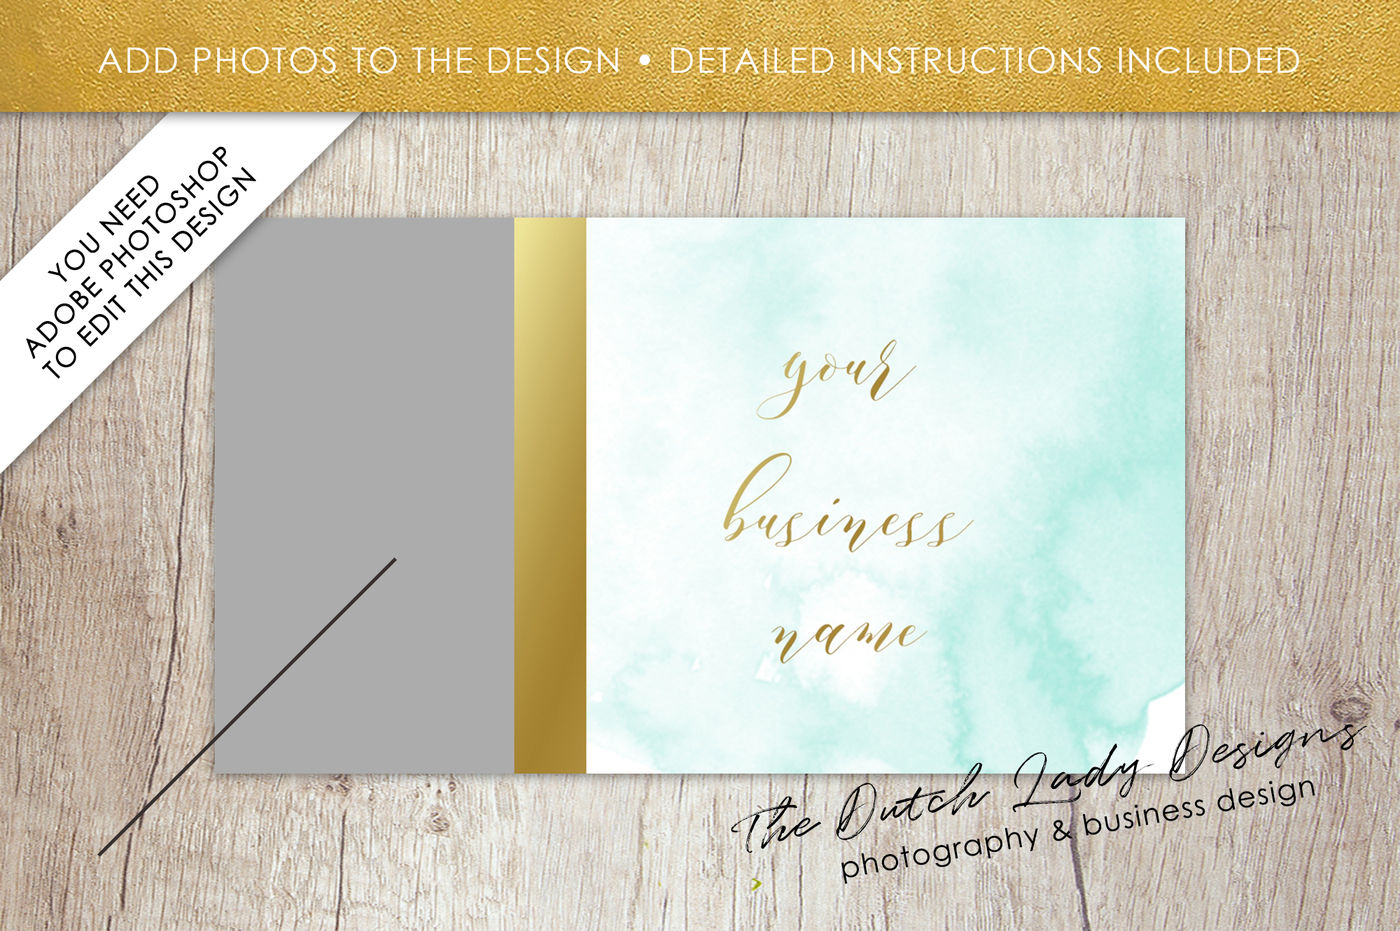 PSD Business Card Template #1 By The Dutch Lady Designs | TheHungryJPEG